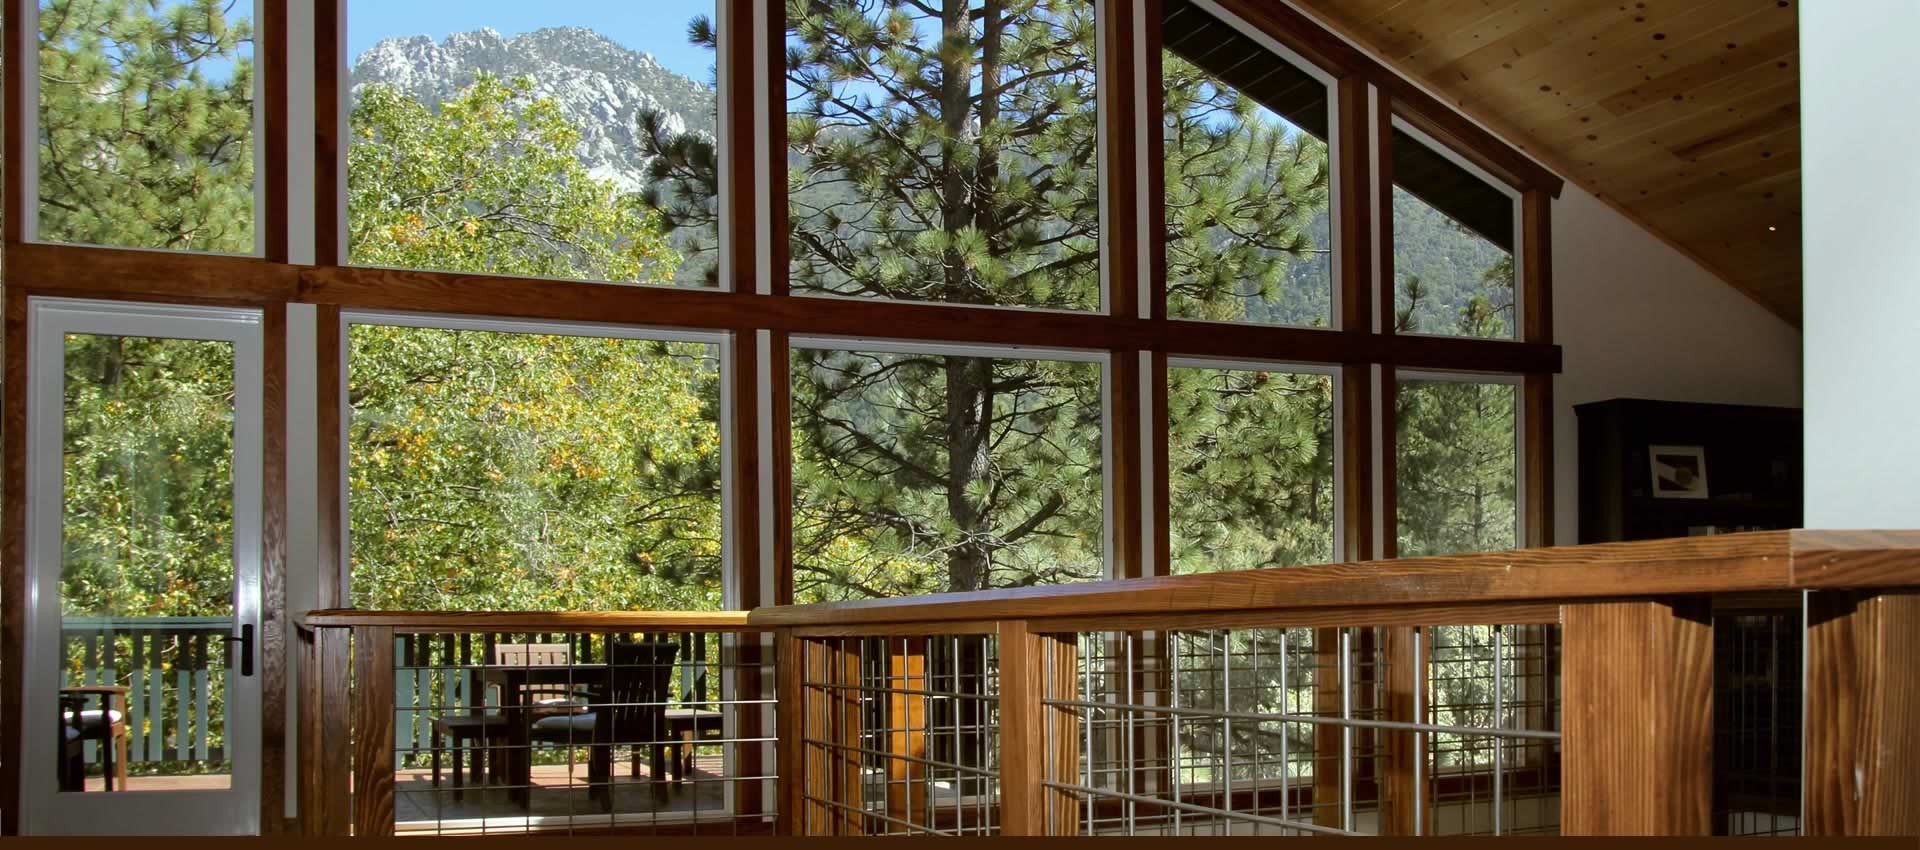 Grand Idyllwild Lodge large windows looking out to forest and mountains